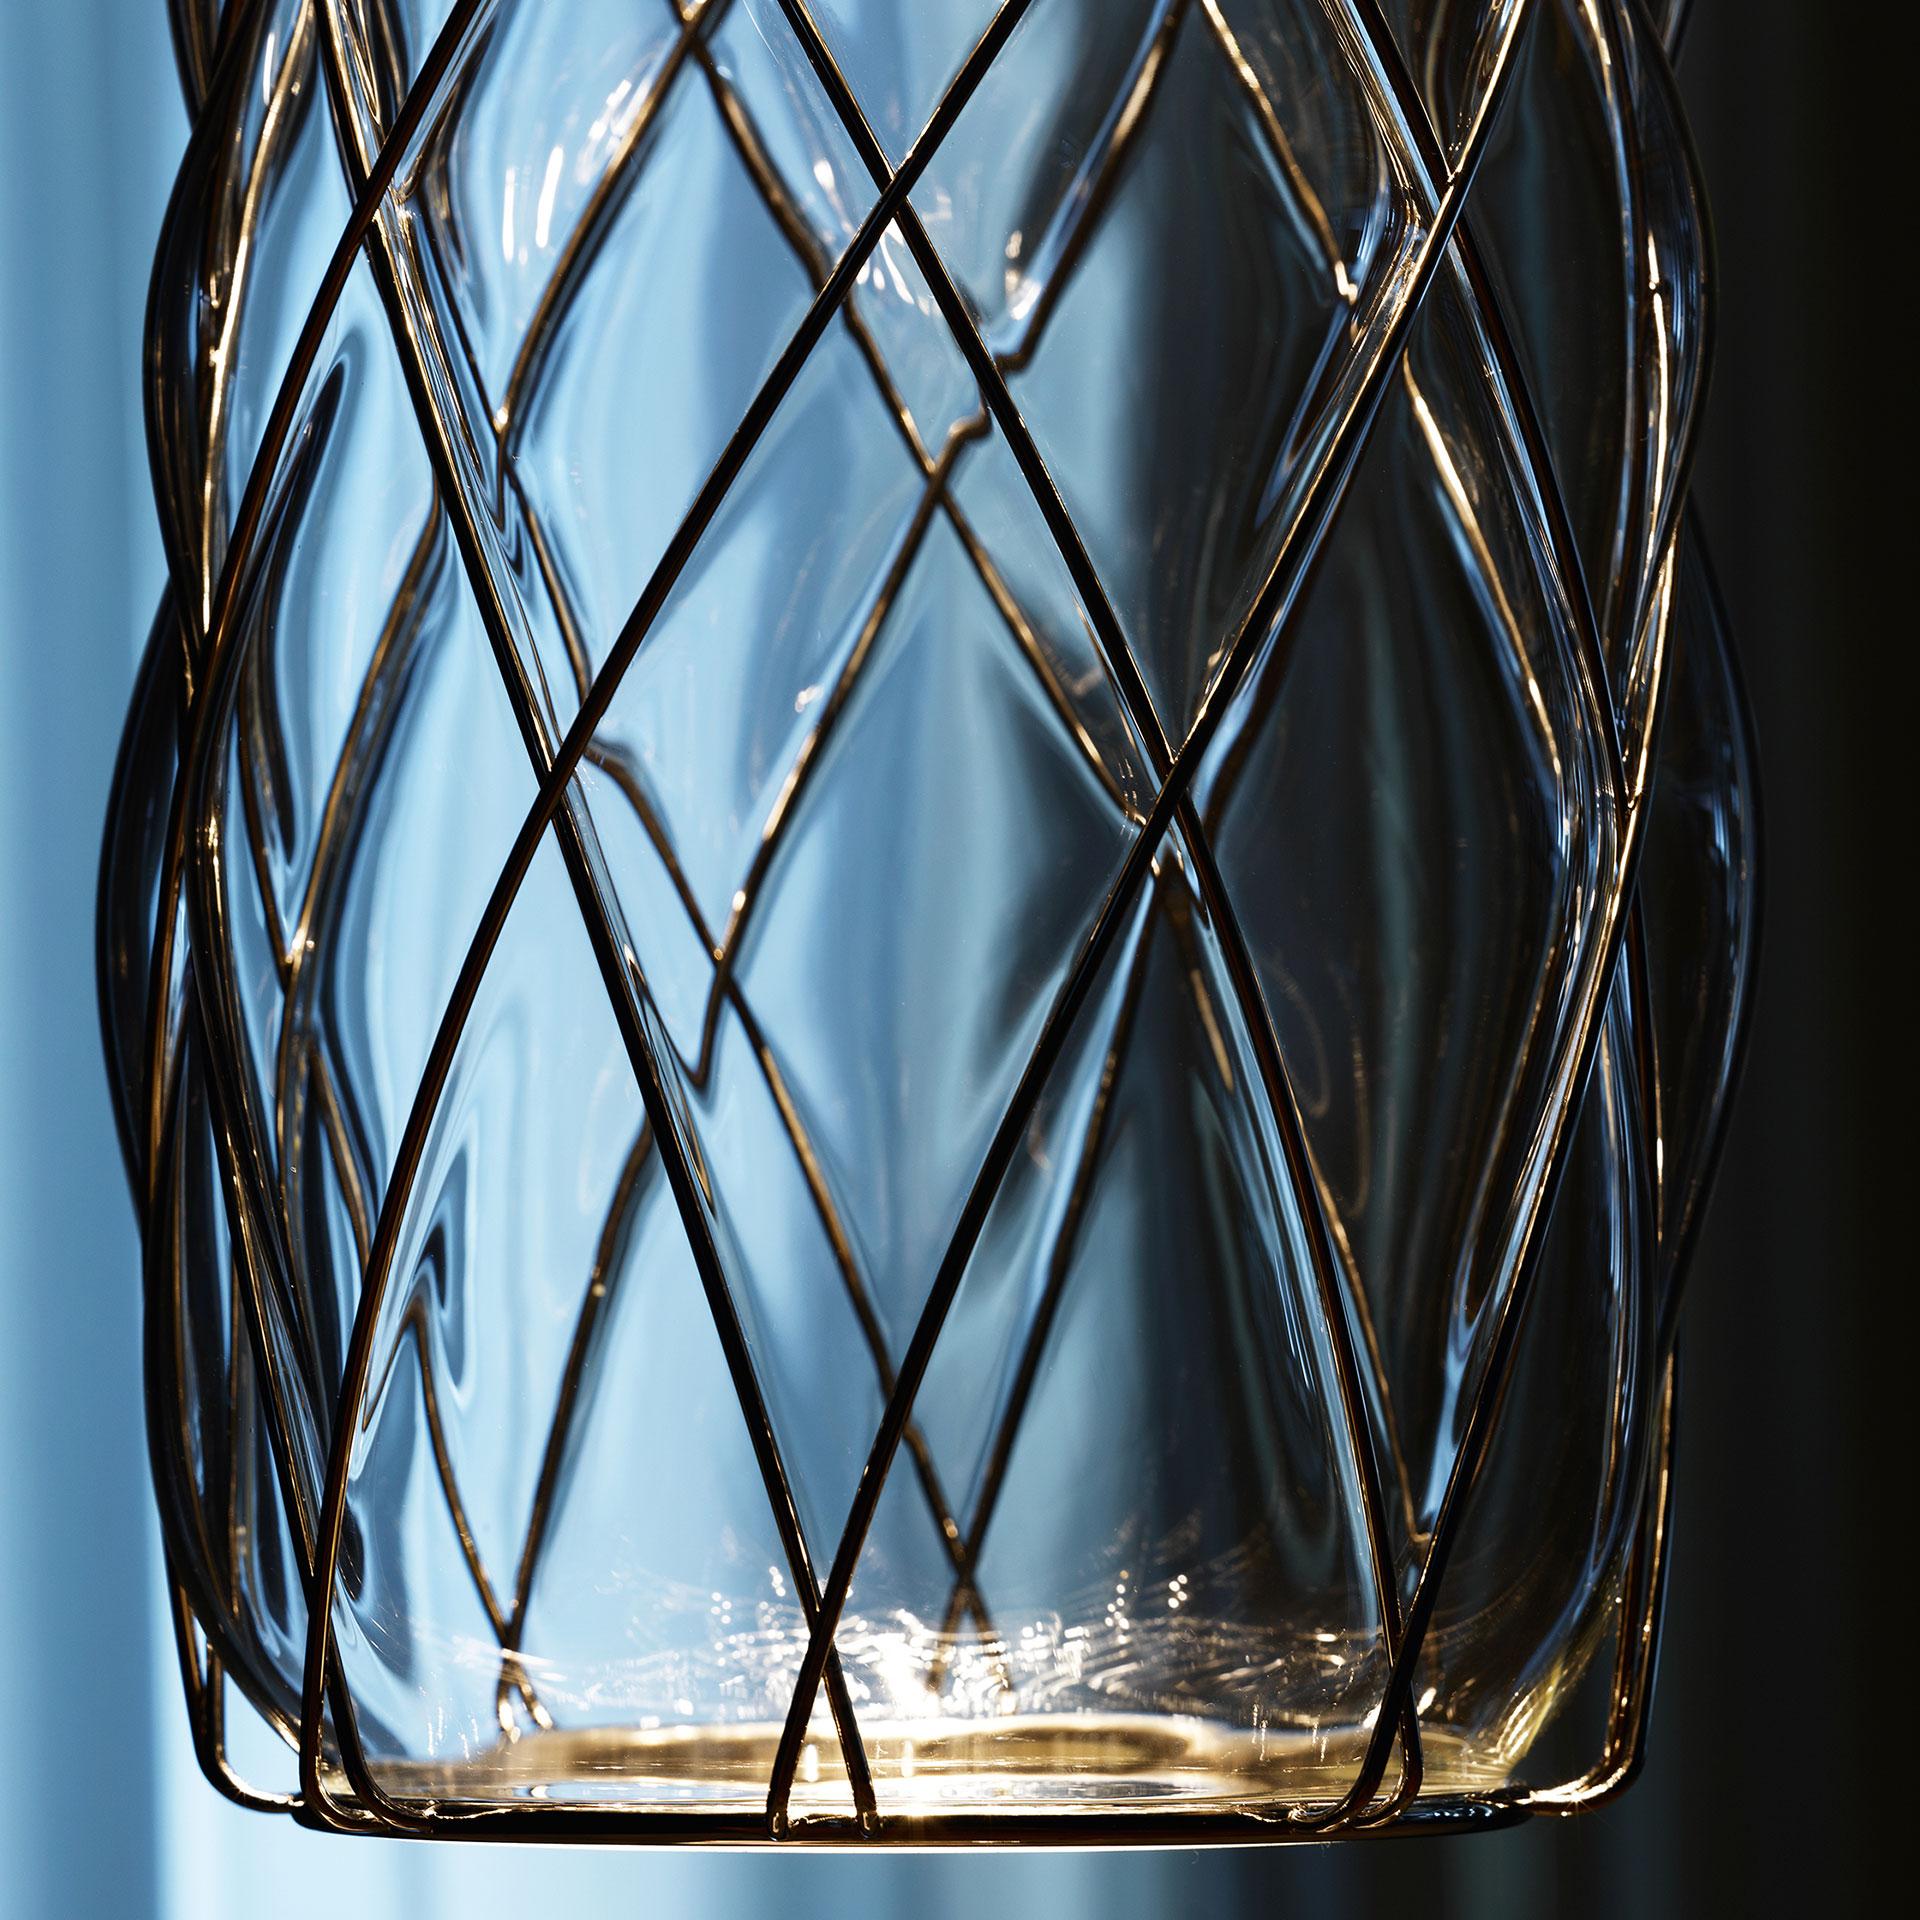 Medium 'Pinecone' suspension lamp in transparent glass & chrome for Fontana Arte. Designed by Paola Navone, the Pinecone comes in both a suspension and table lamp. The diffuser is manufactured using the ancient caged blown glass technique: the glass